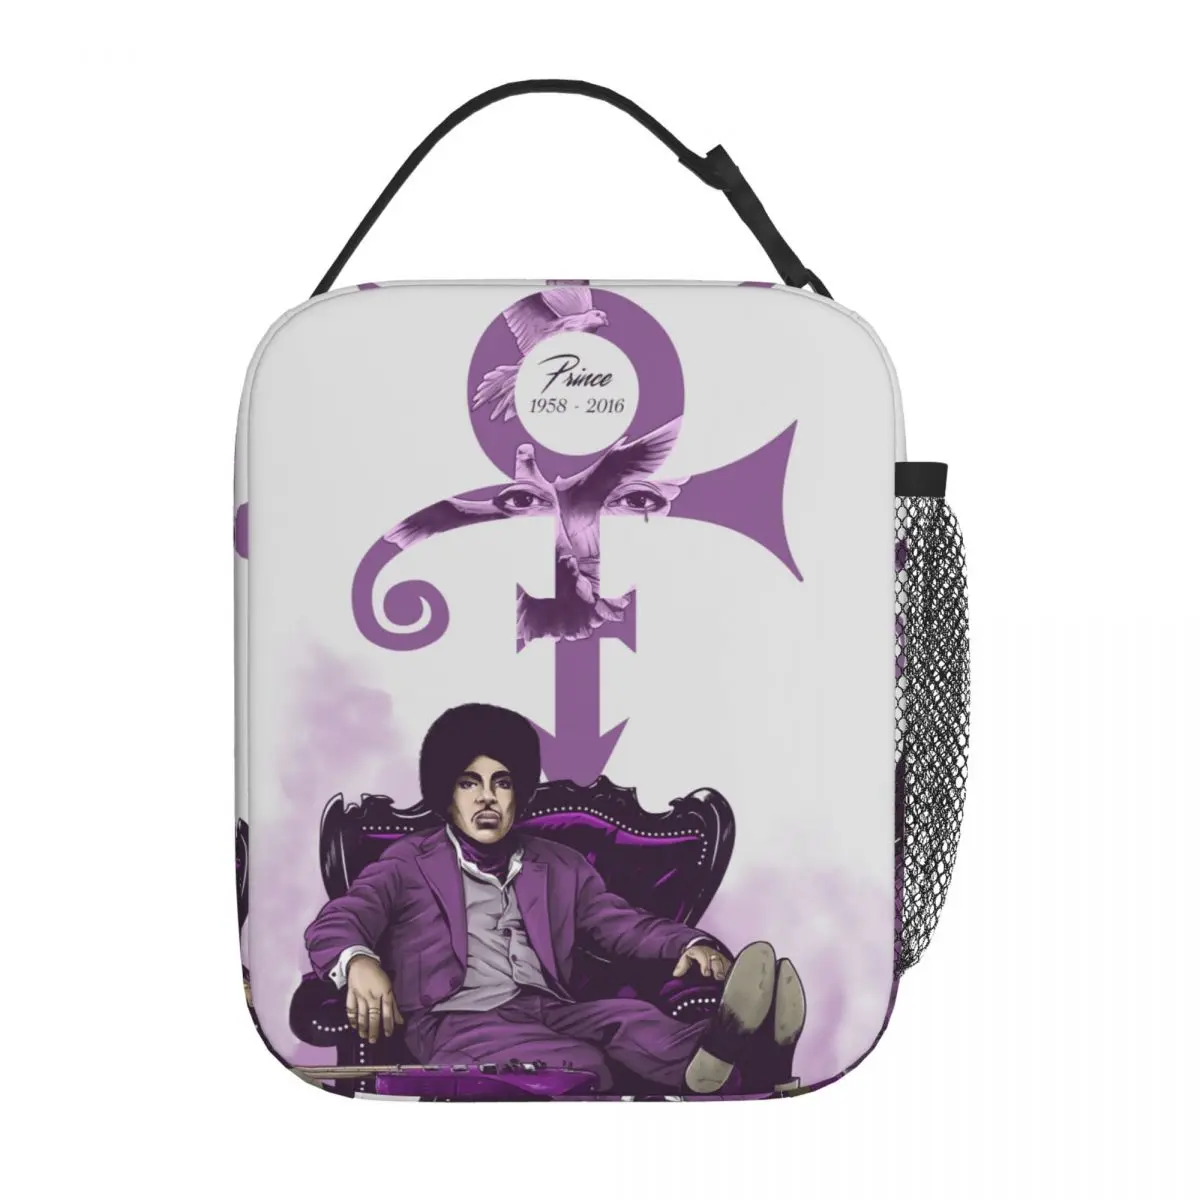 

Rest In Peace Purple Paisley Park Prince Thermal Insulated Lunch Bags for School Tafkap The Artist Box for Lunch Thermal Cooler